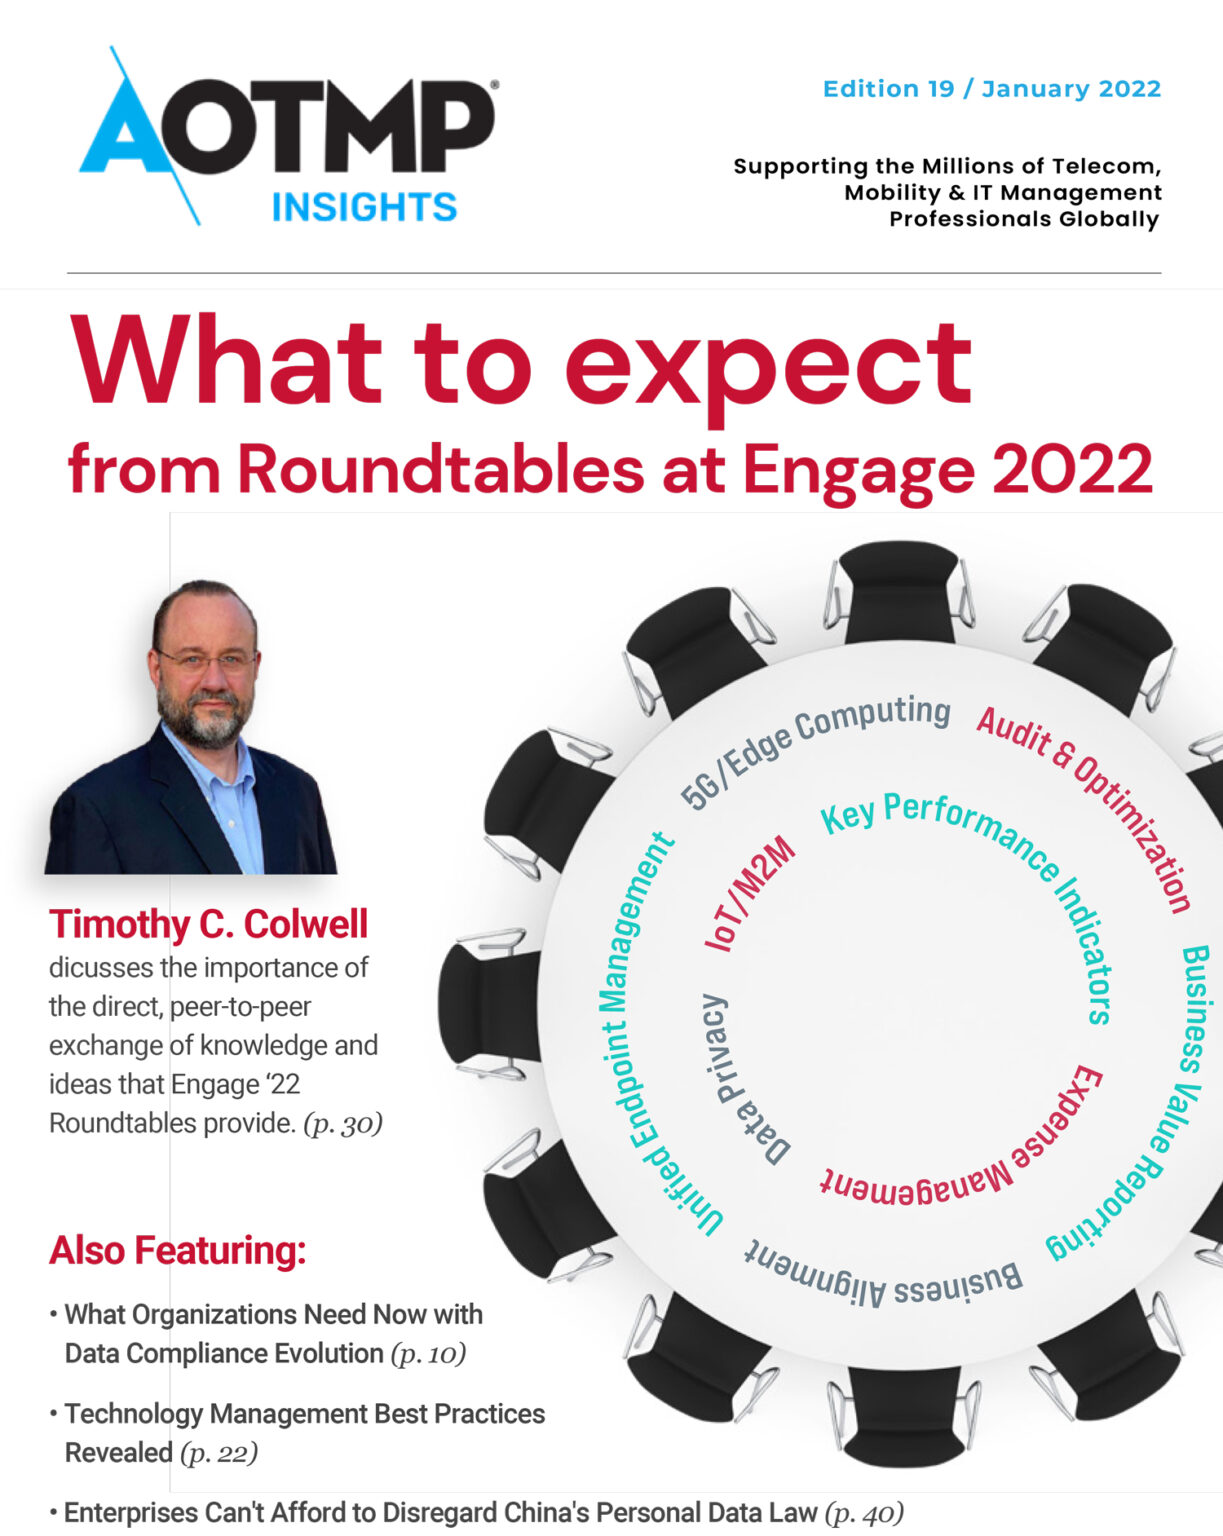 Cover for the January edition of Insights magazine.